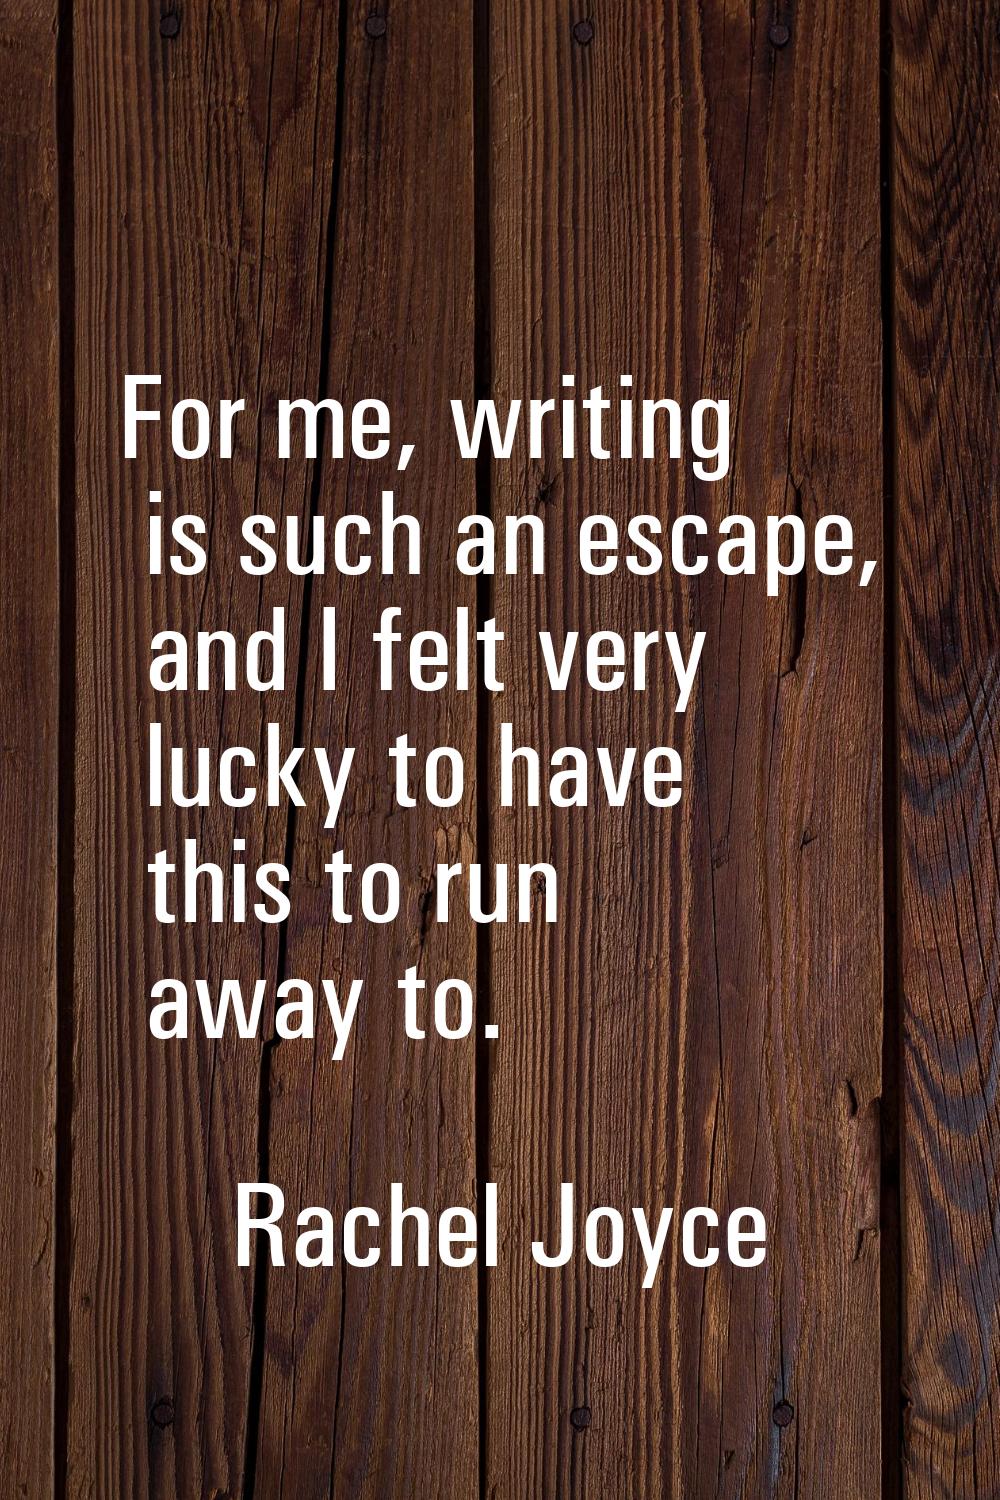 For me, writing is such an escape, and I felt very lucky to have this to run away to.